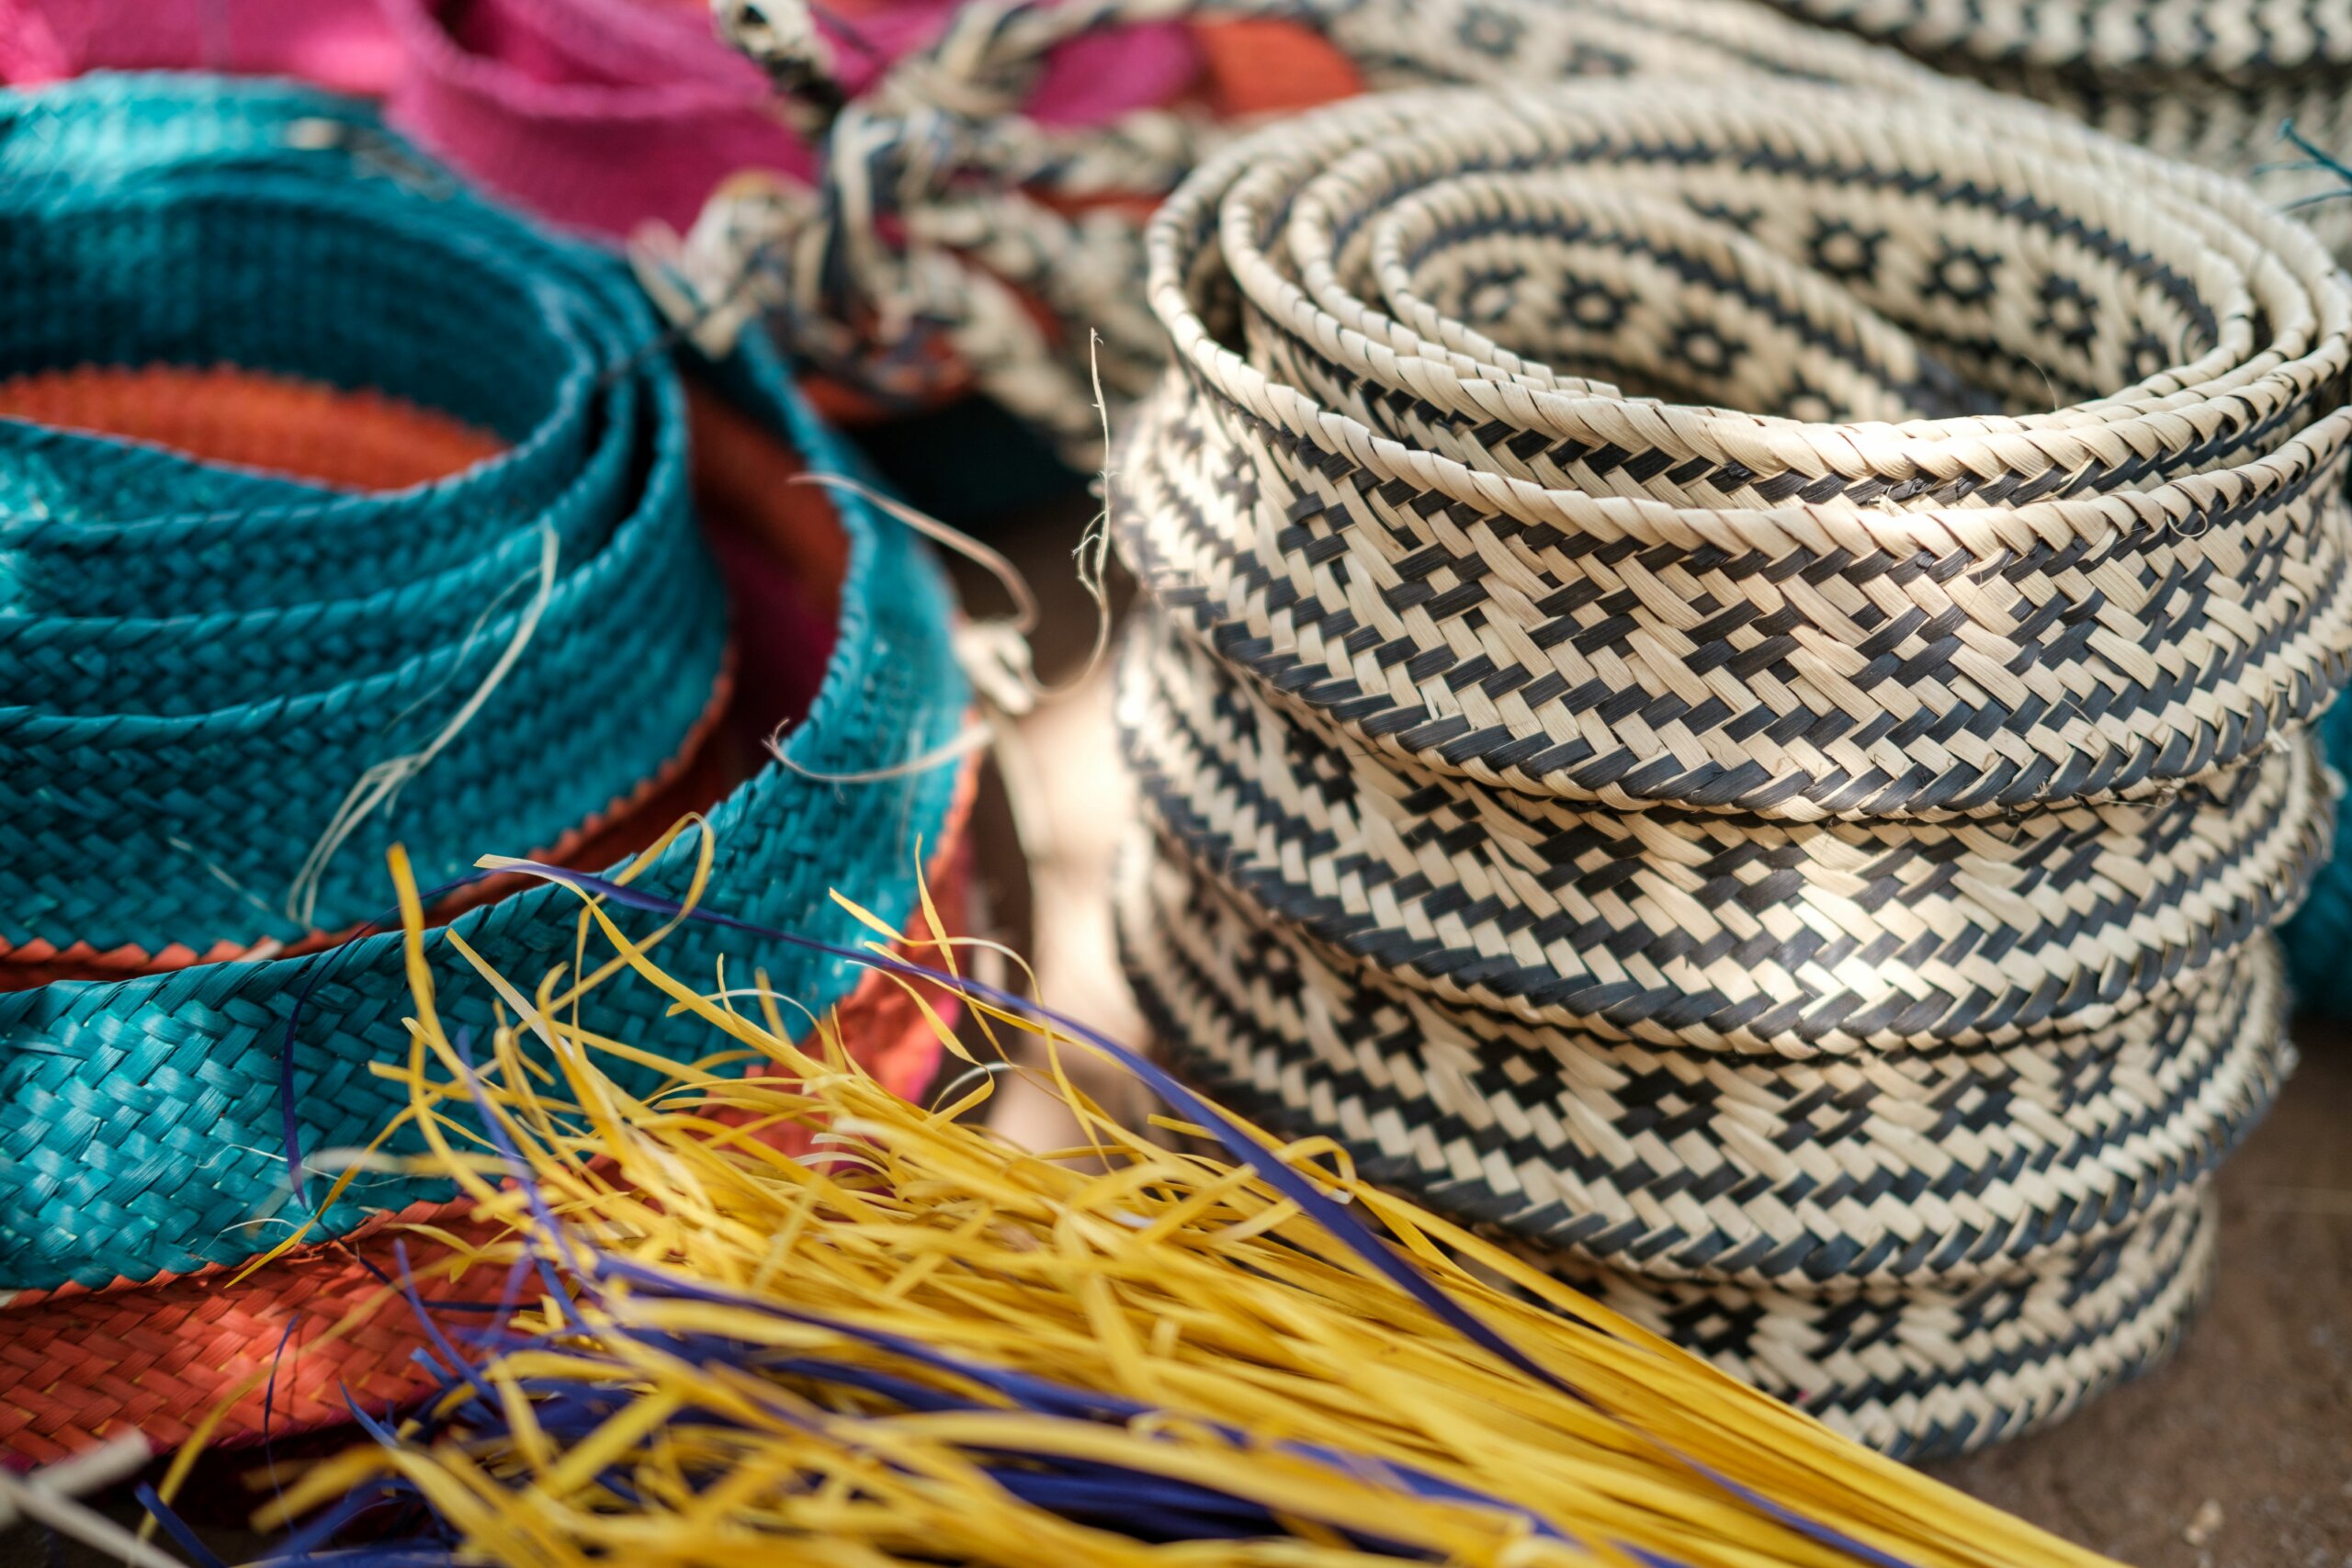 Image of handwoven baskets.